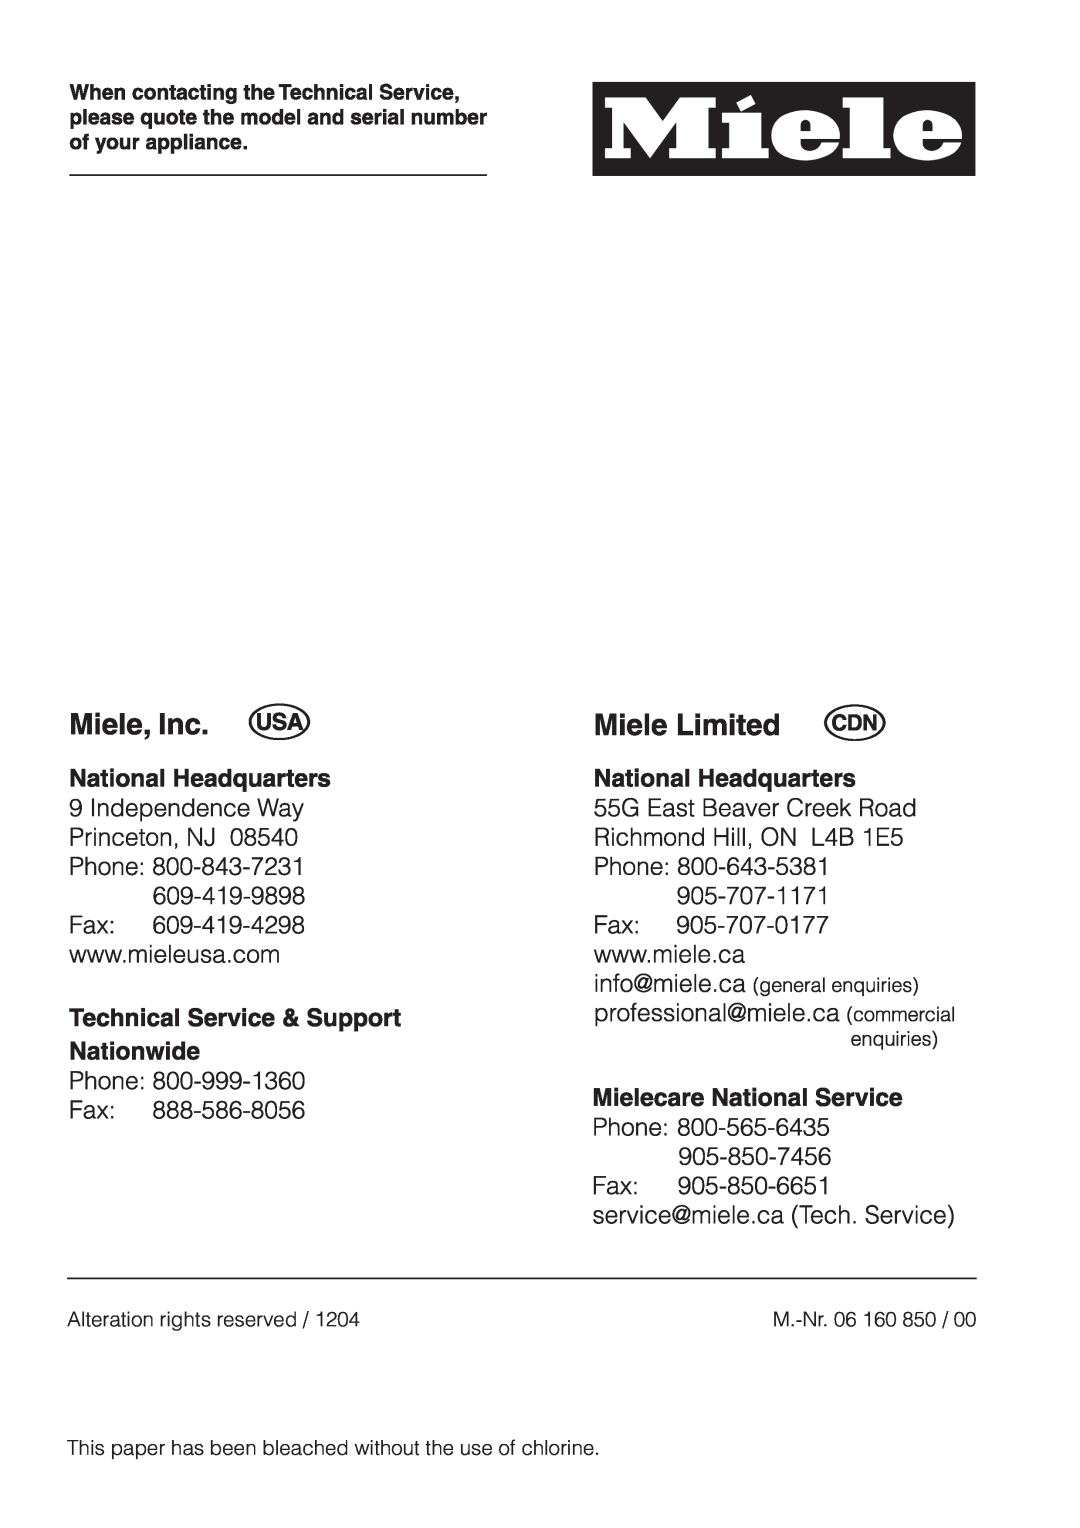 Miele H397BP2, H398BP2 operating instructions Alteration rights reserved, M.-Nr.06 